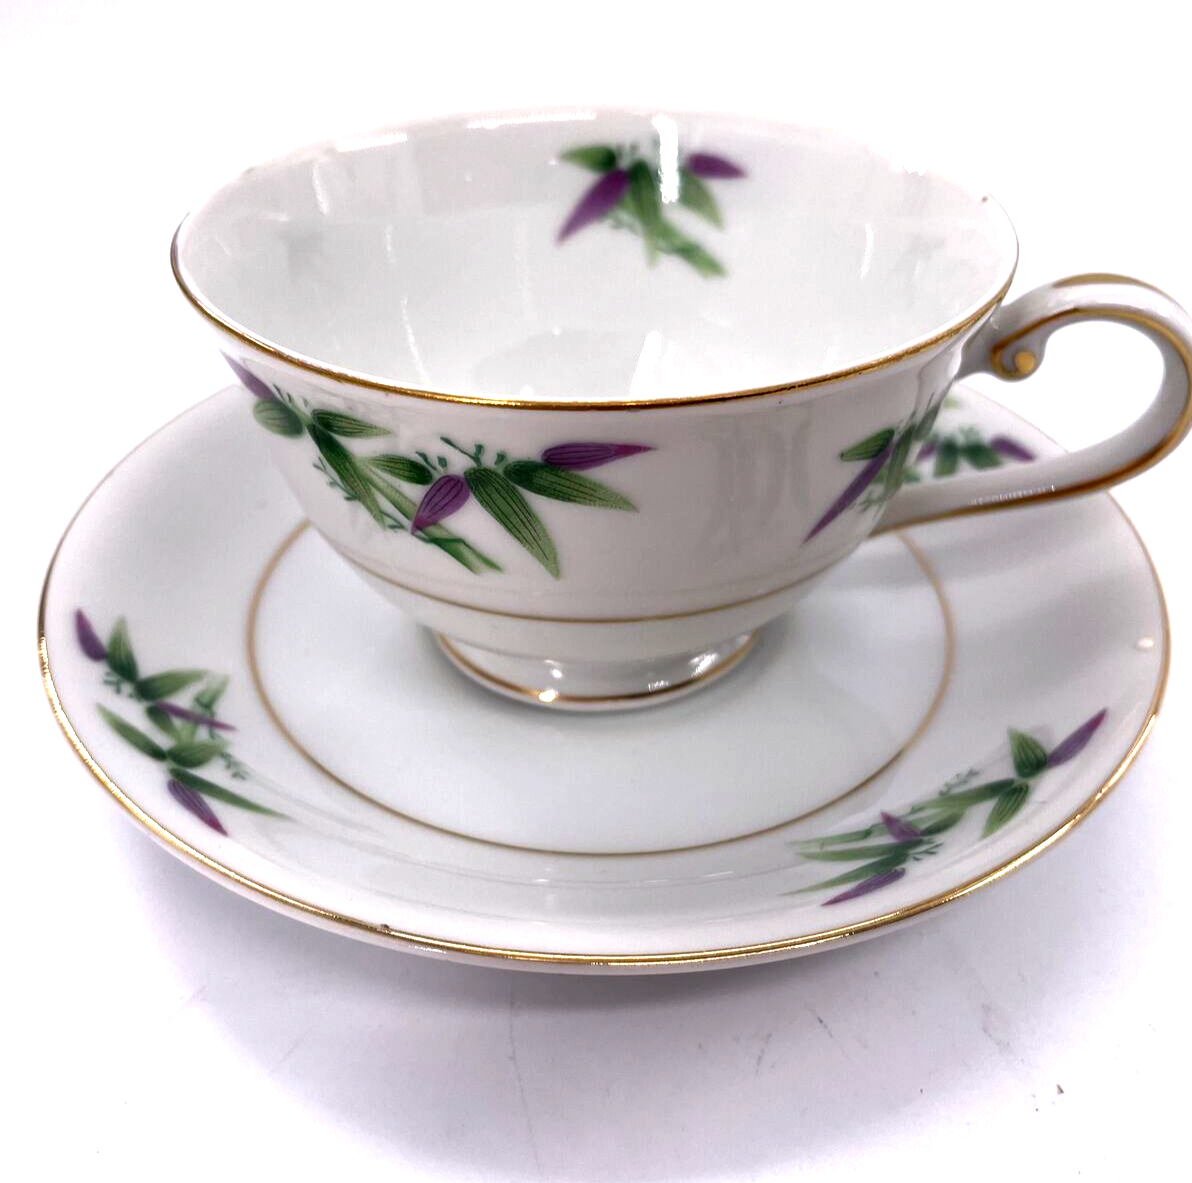 Primary image for Harmony House MANDARIN 2 3/8" Footed Cup  Pink/Green Gold Trim